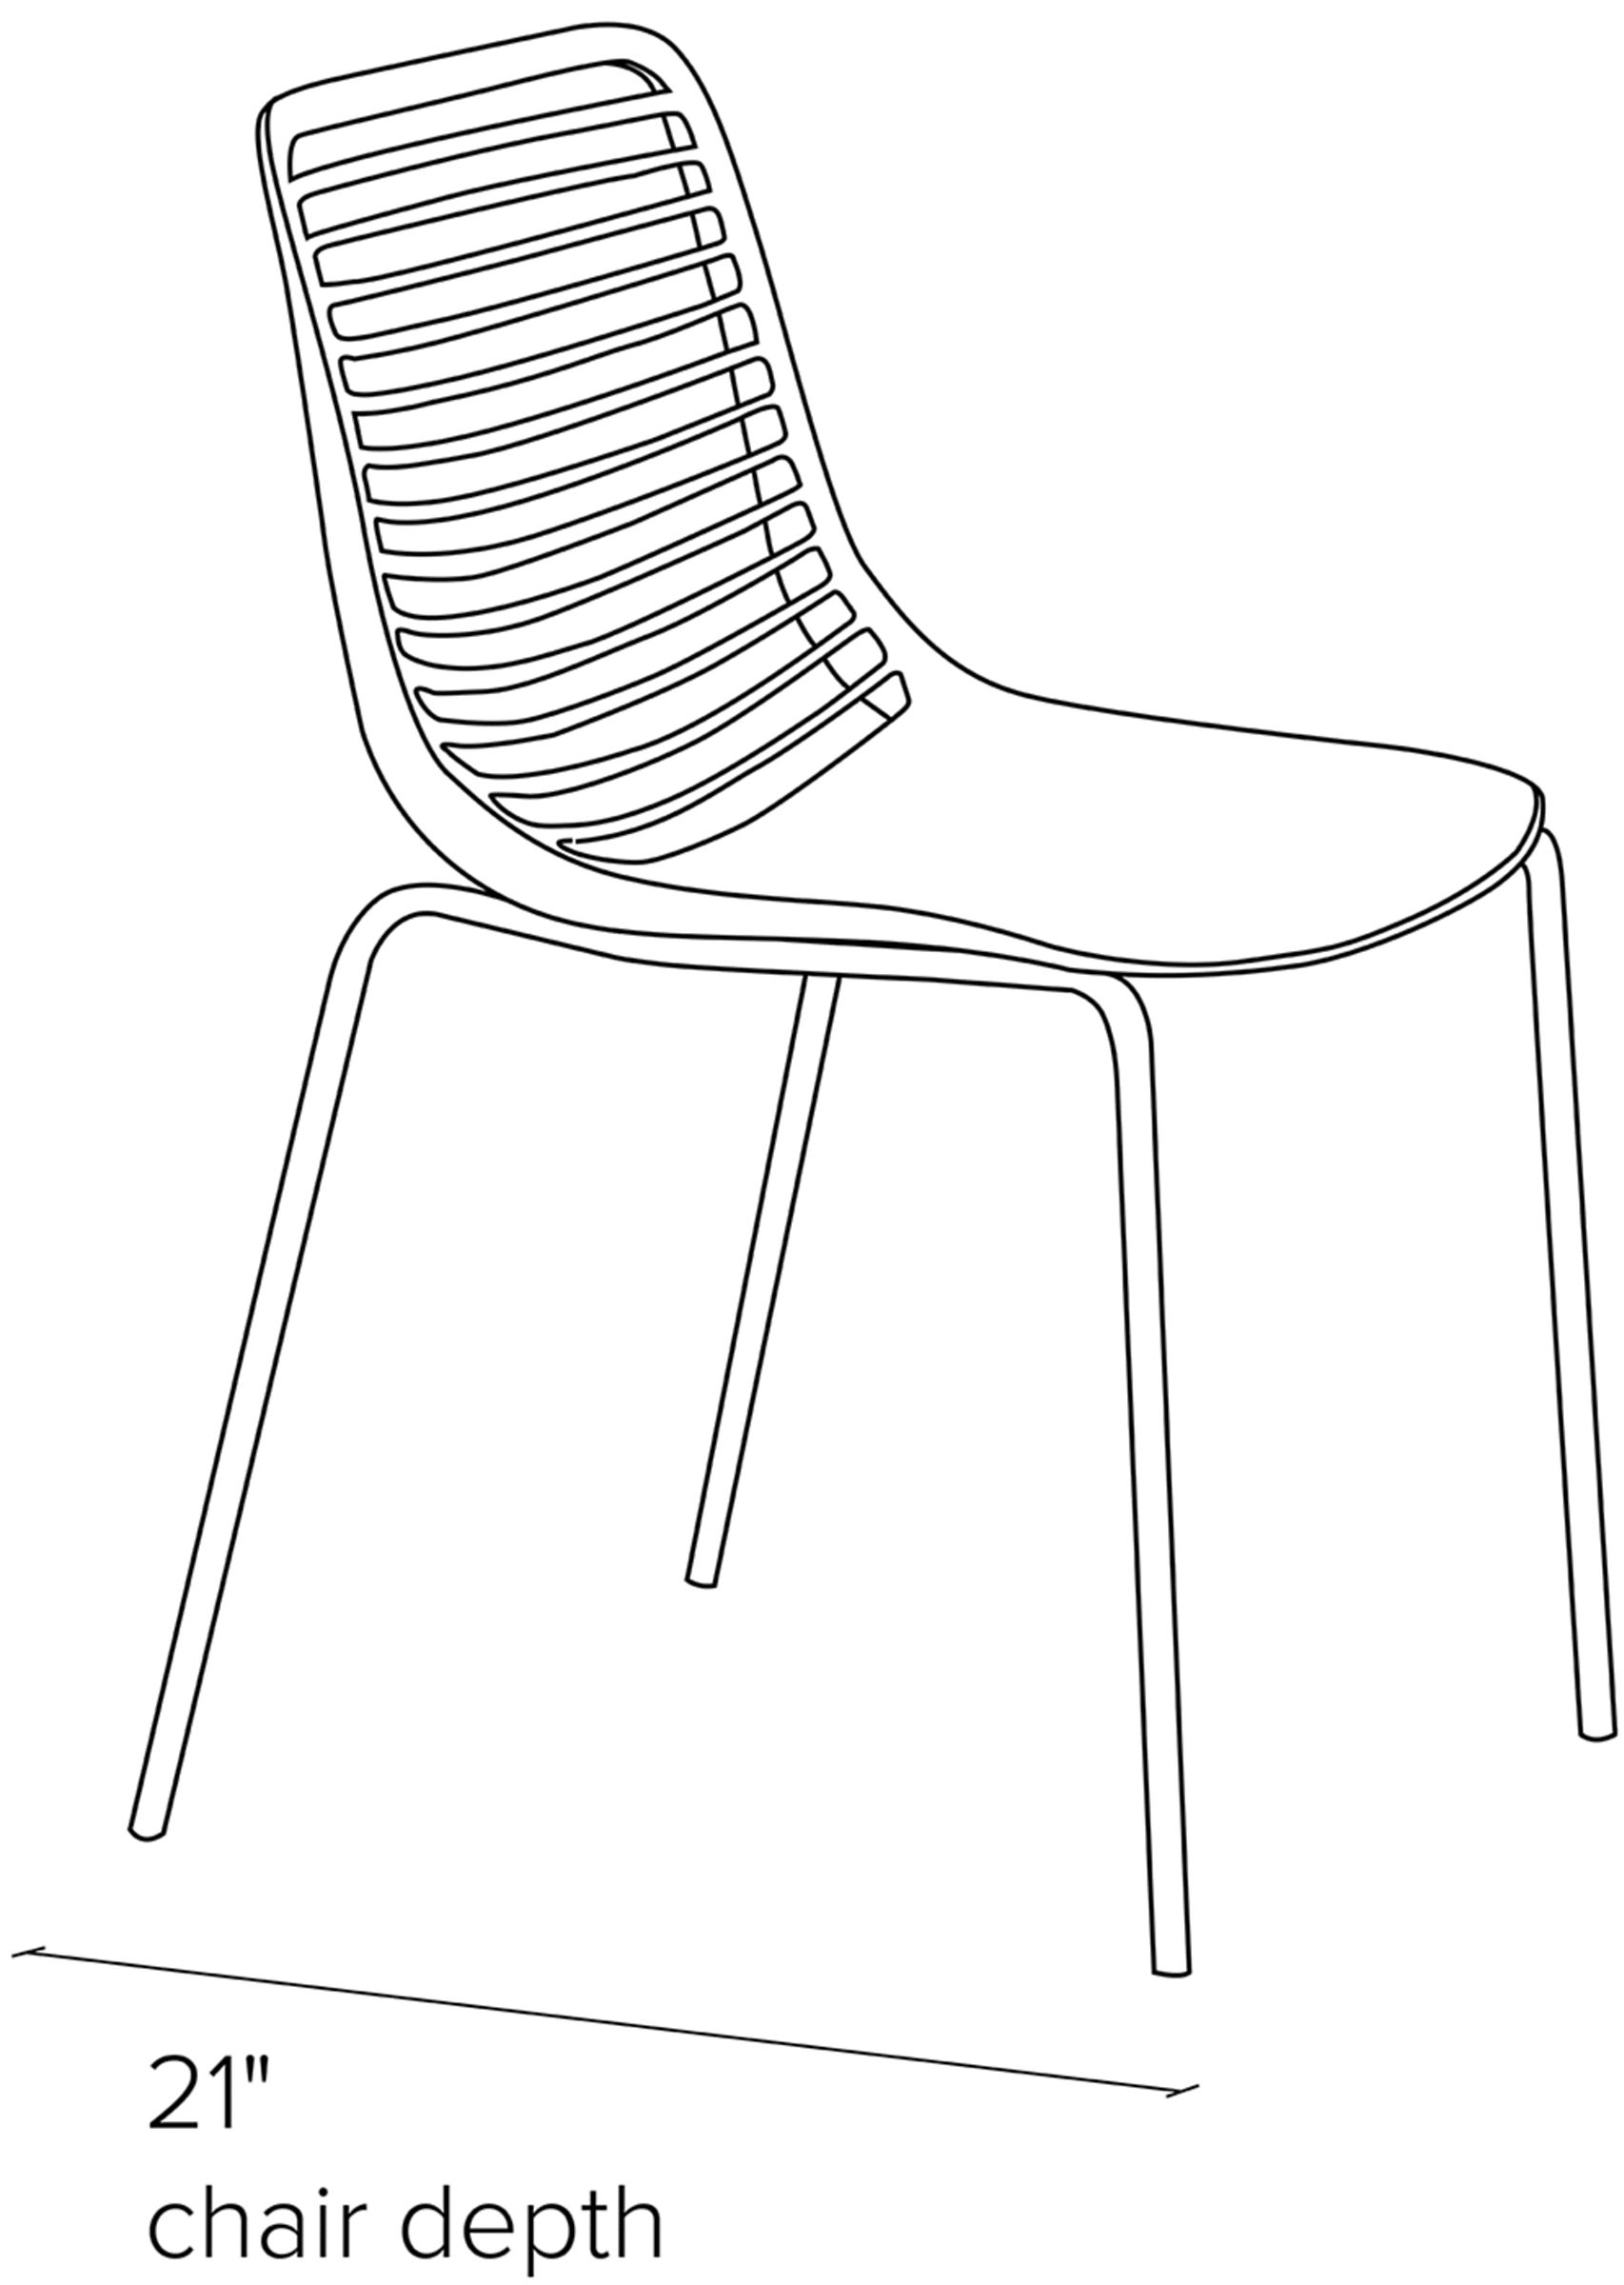 Side view dimension illustration of Mini side chair.